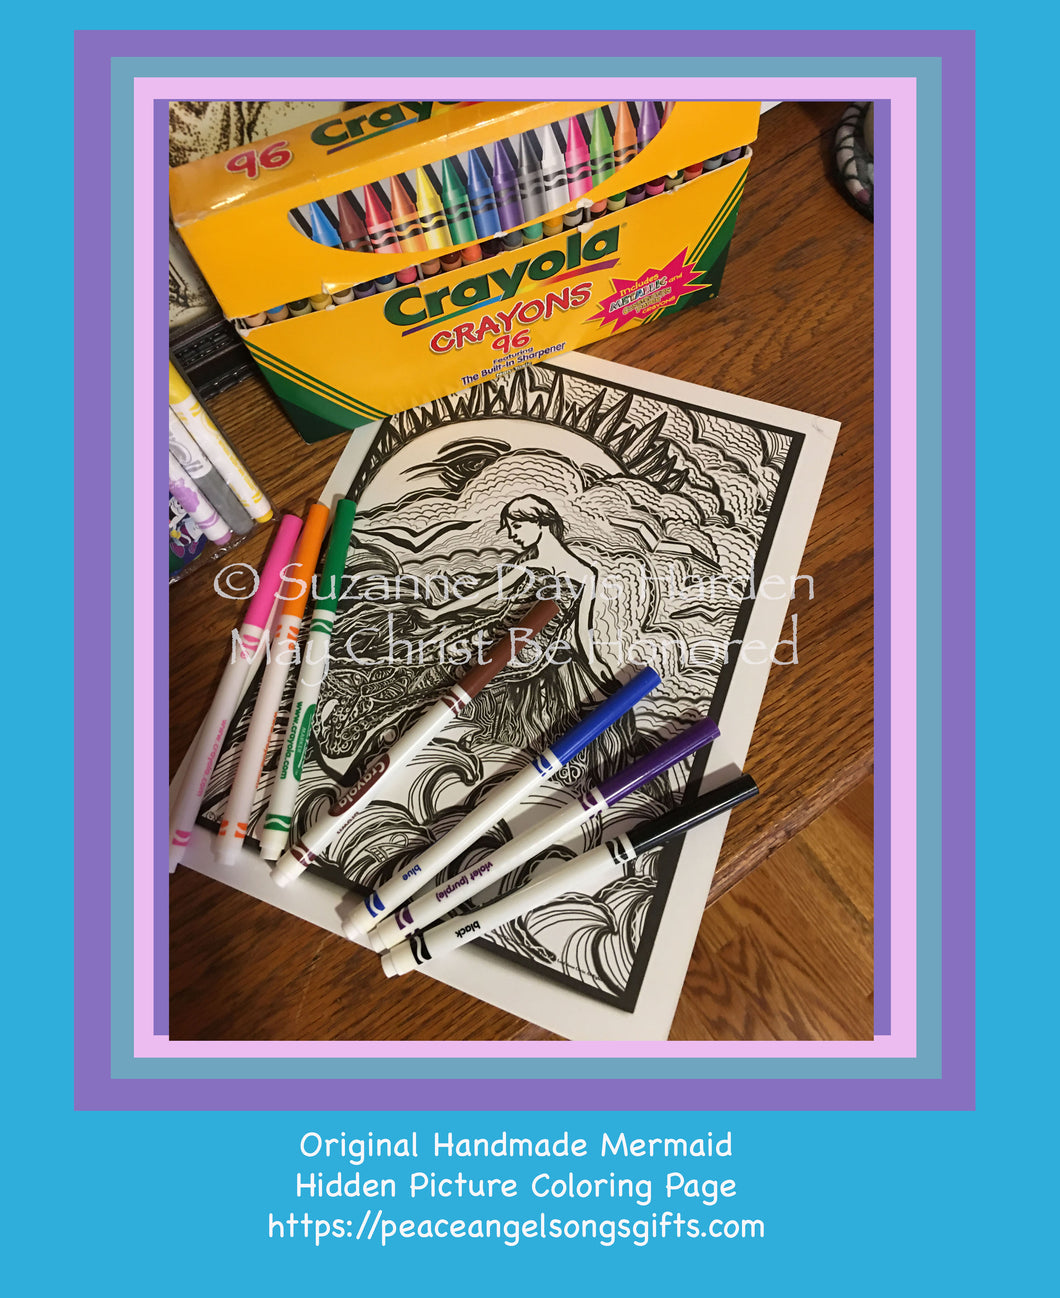 Handmade Digital Download Hidden picture coloring page by Suzanne Davis Harden